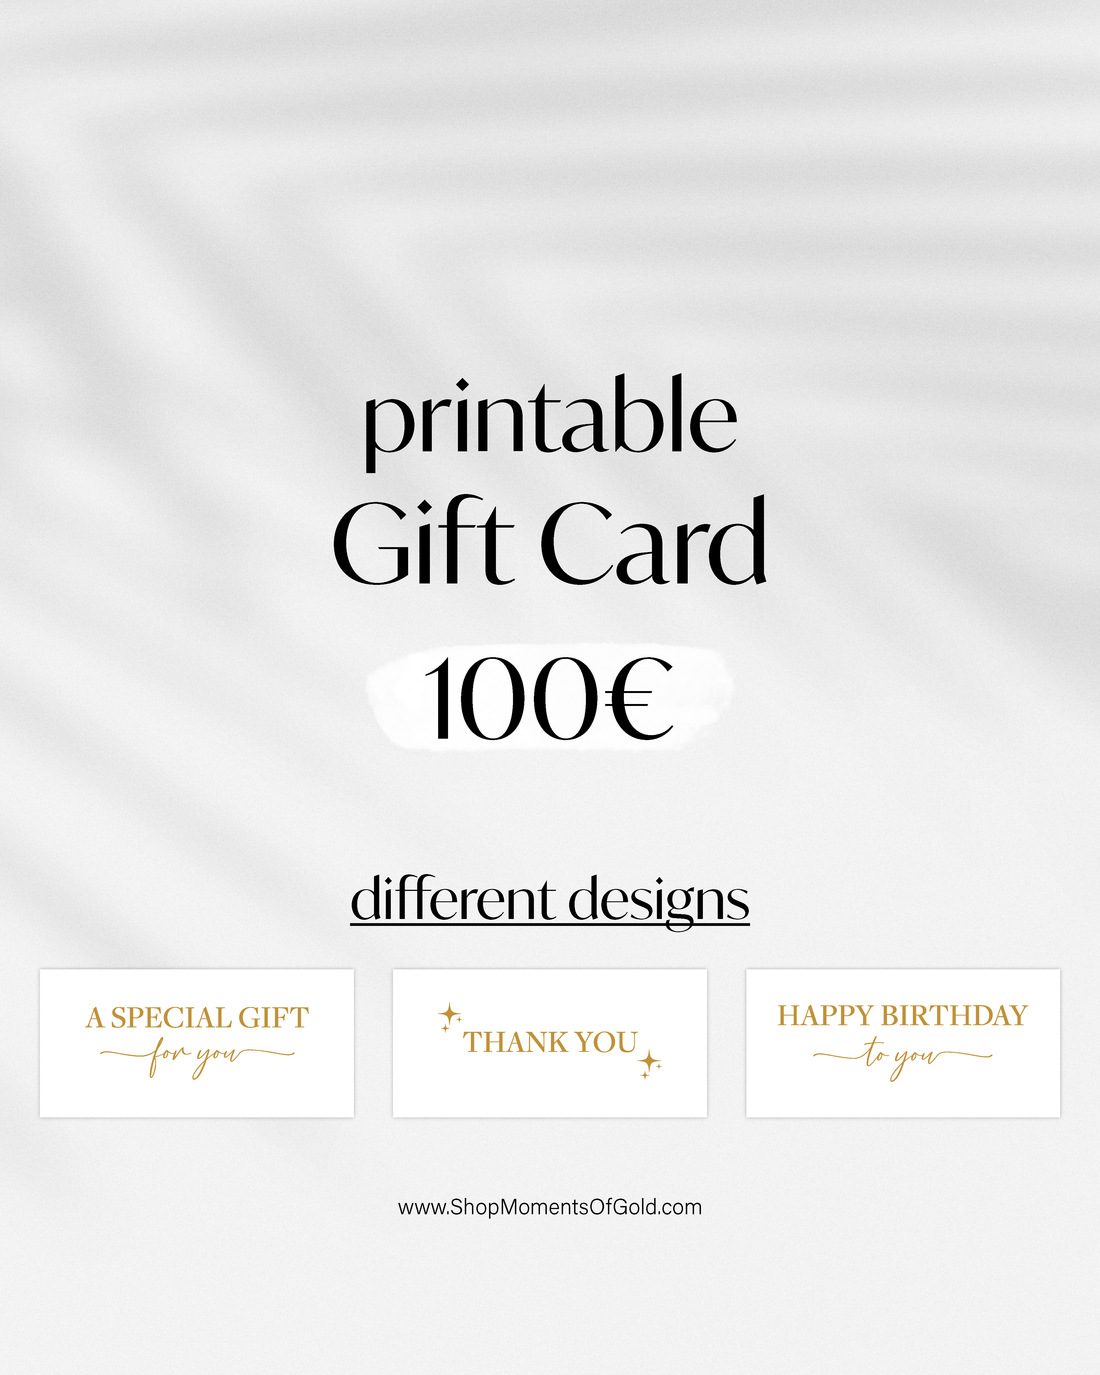 printable 100€ gift card with different designs